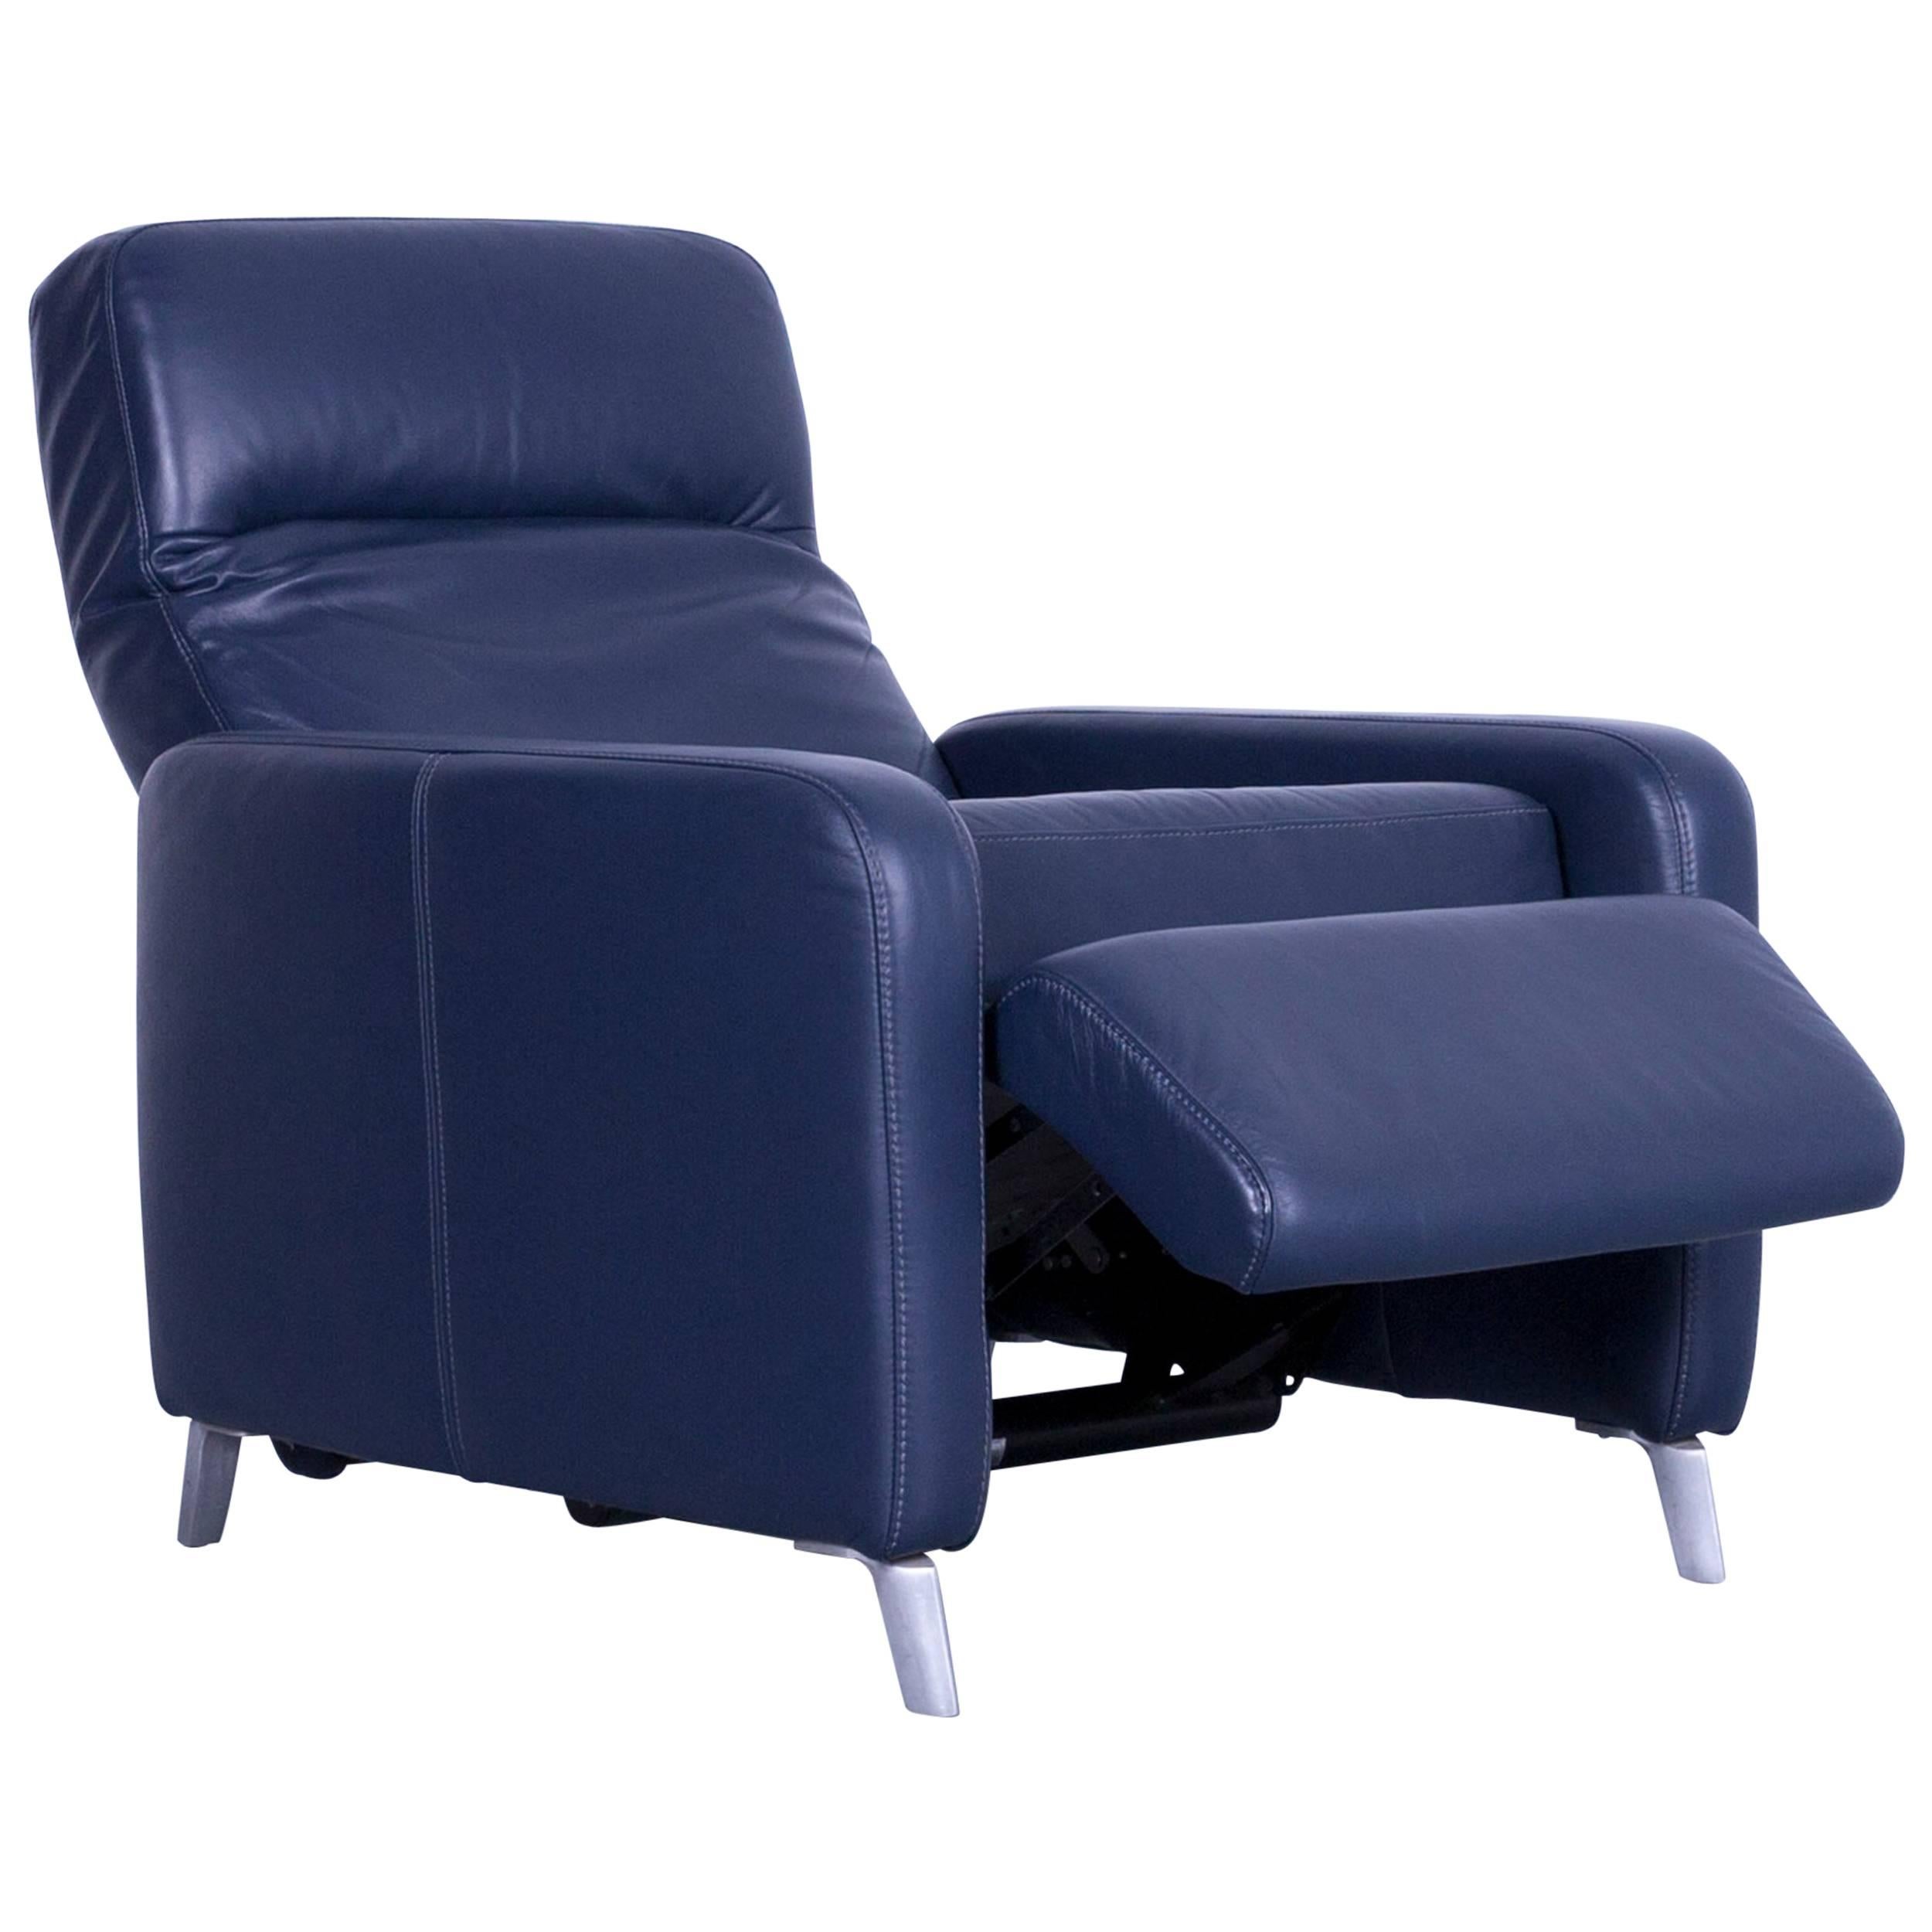 Musterring Leather Armchair Blue One-Seat Recliner